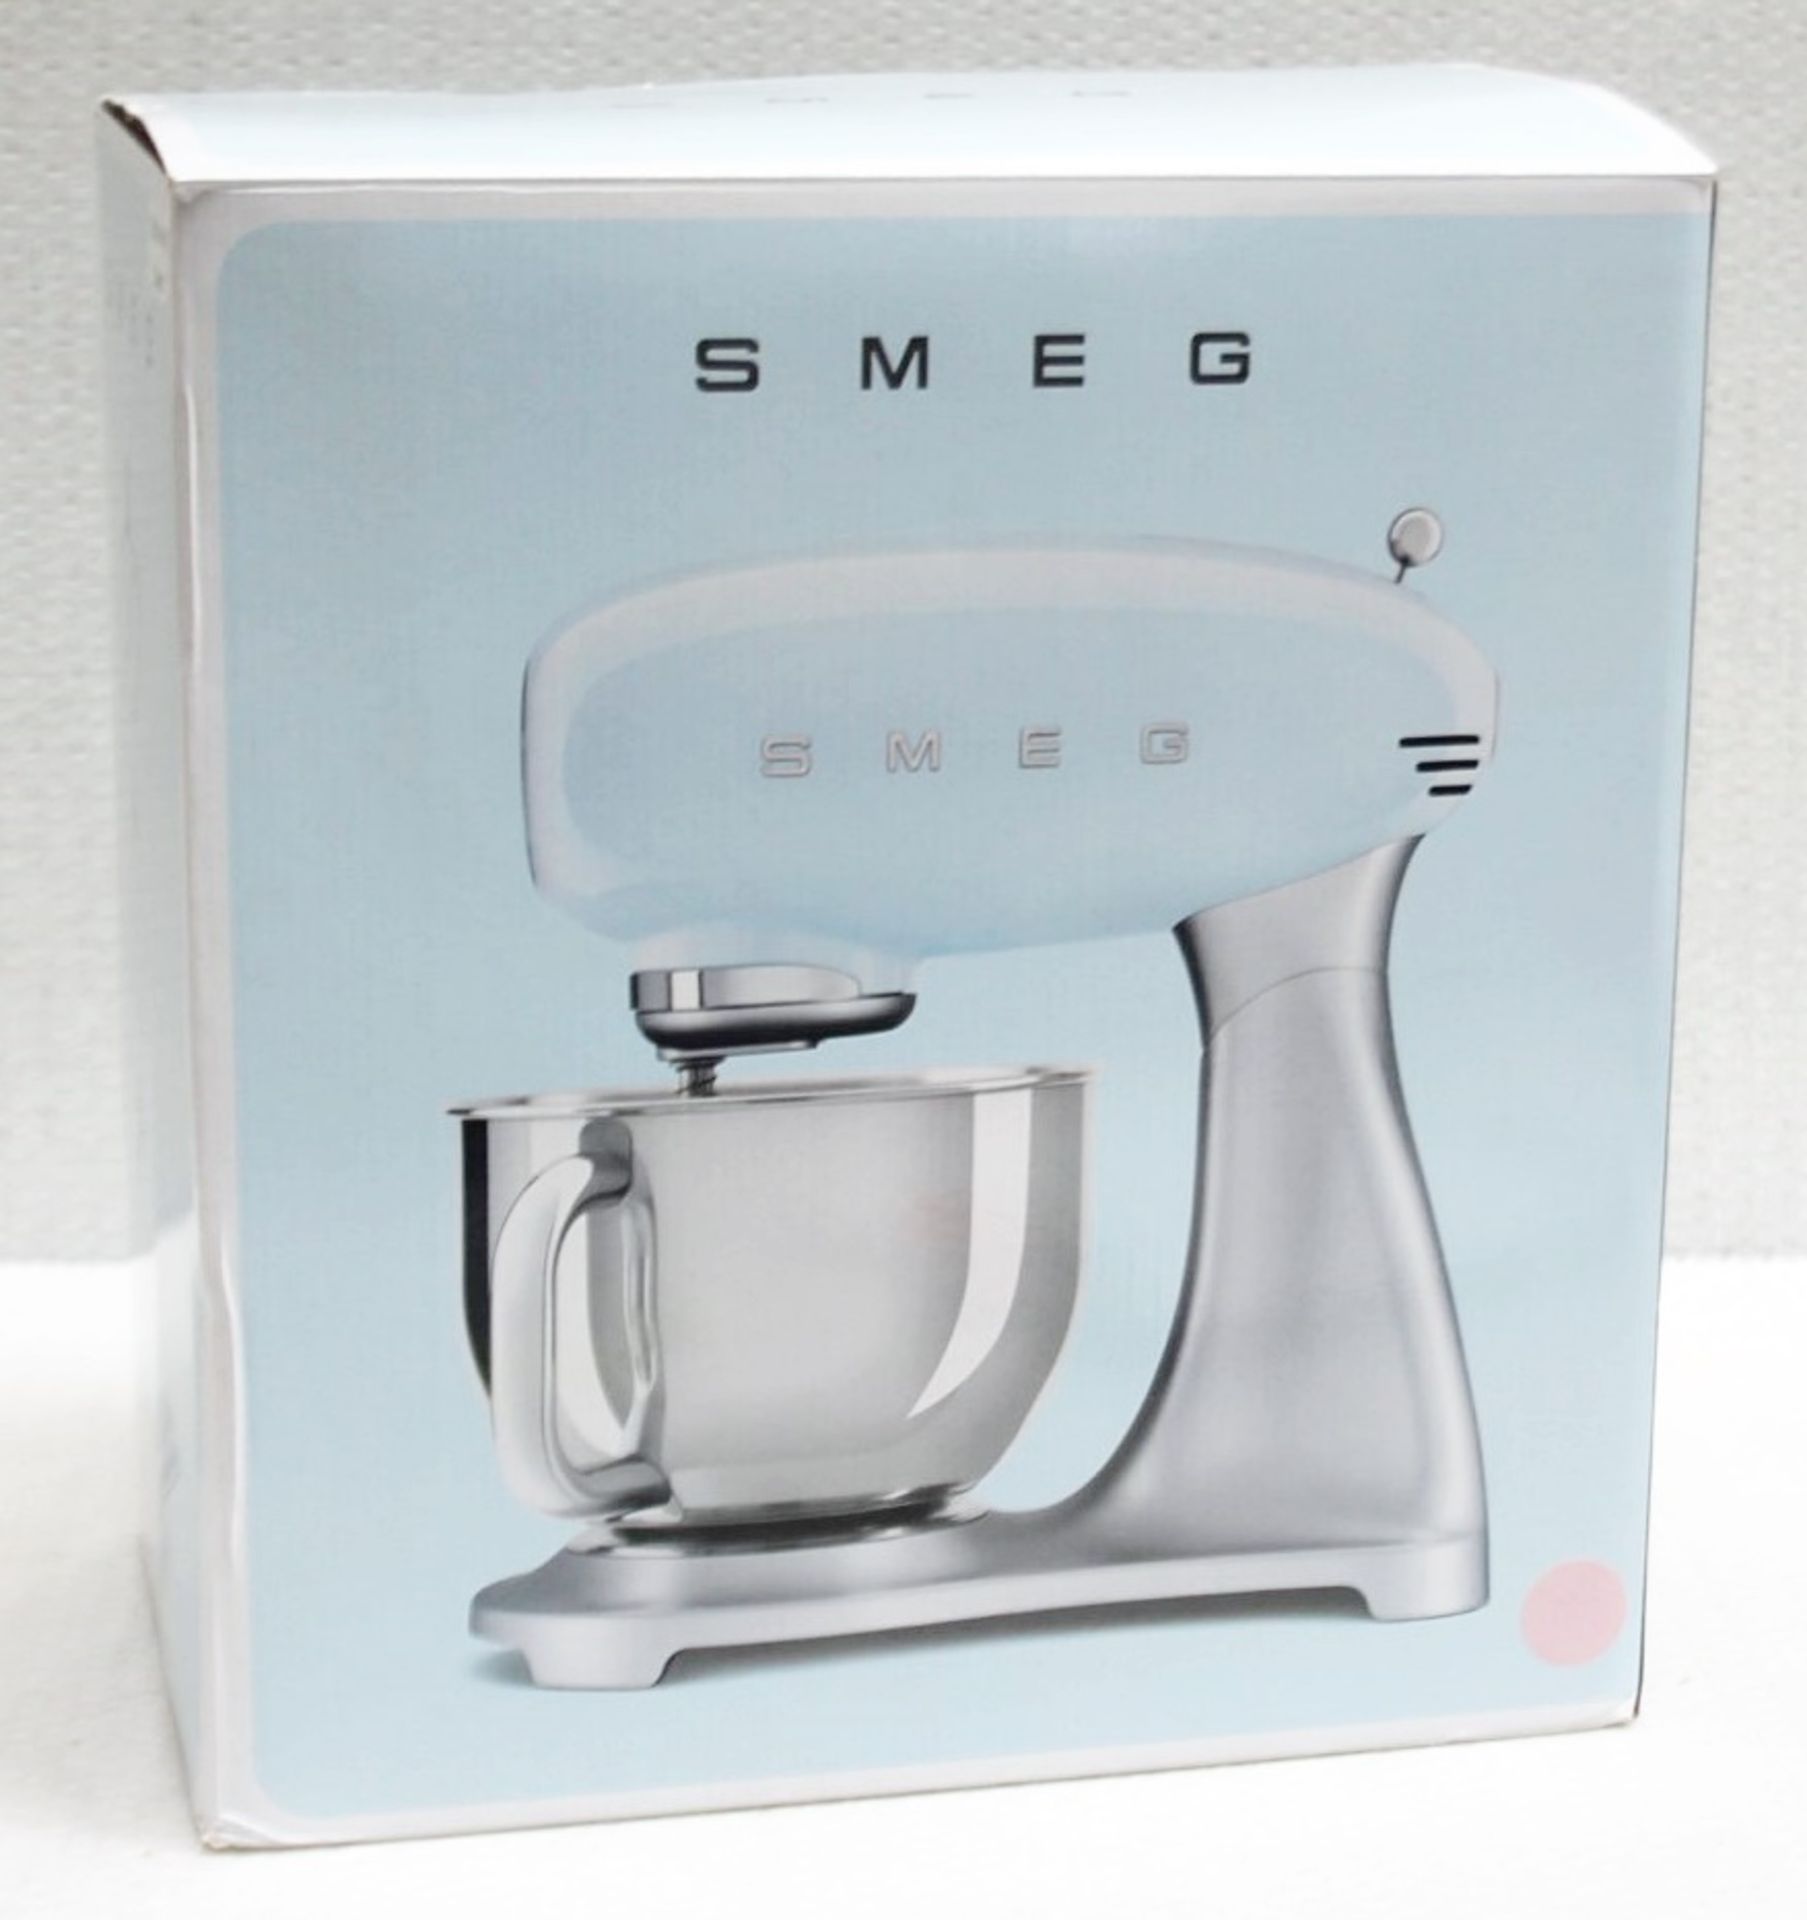 1 x SMEG 50's Retro Stand Mixer In Pink With 4.8 Litre Bowl And Accessories - RRP £499.00 - Image 14 of 14